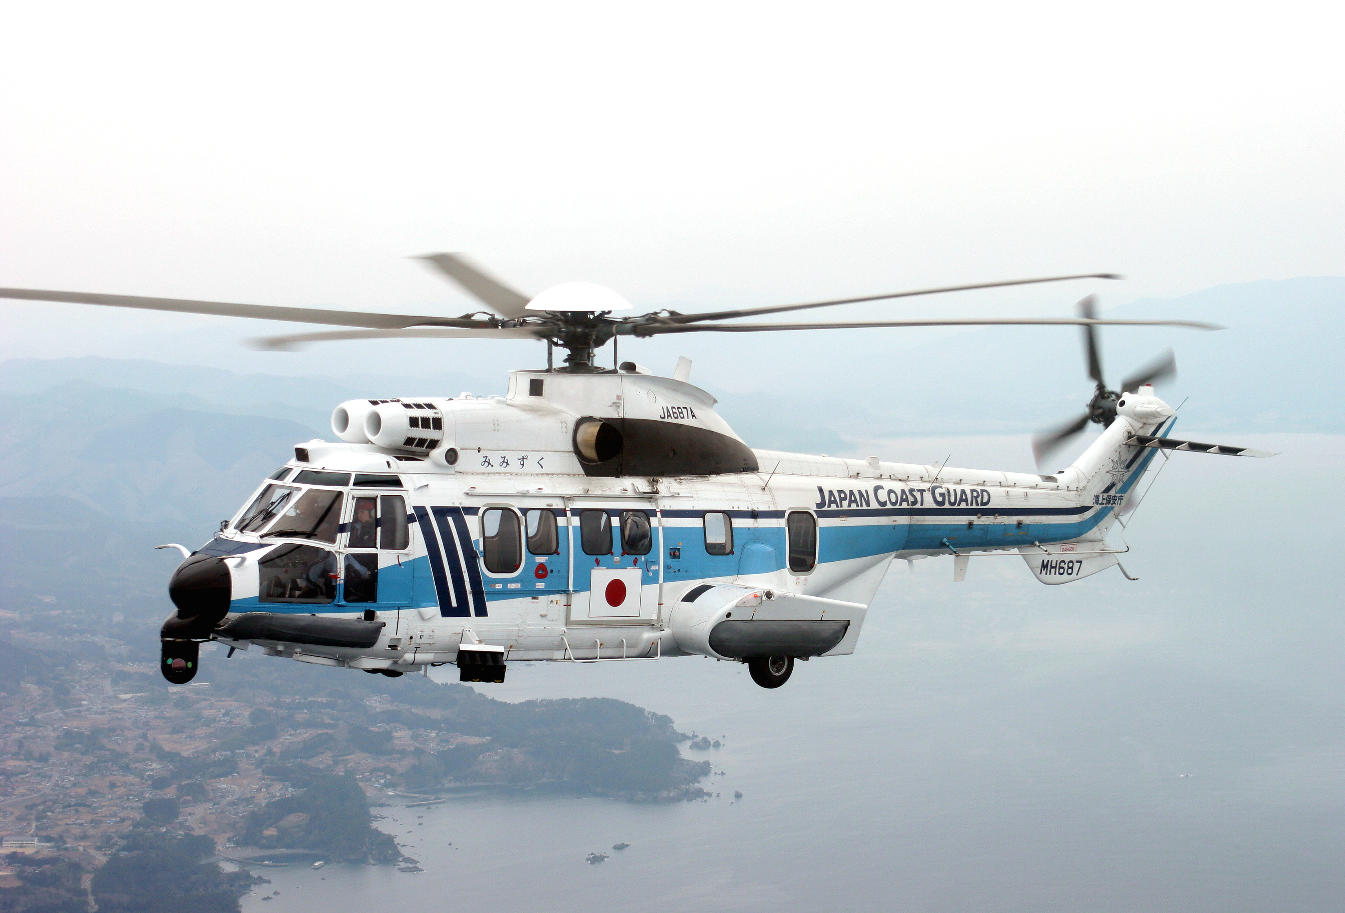 Farnbororough 2018: Japan Coast Guard signs up for H225 support